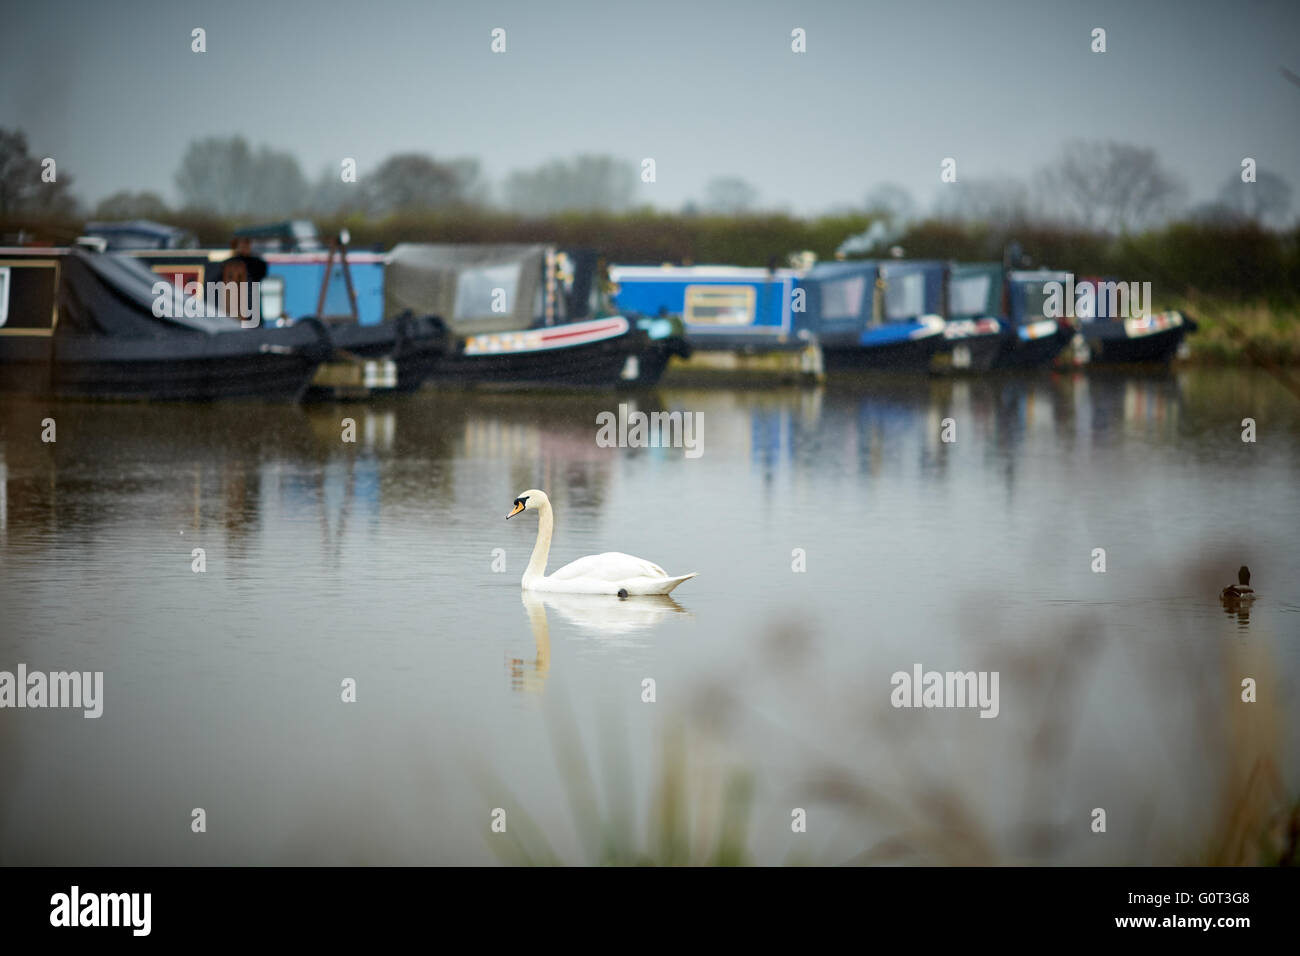 Overwater Marina, Coole Lane, Newhall, Nantwich, Cheshire waterway dull wet day weather grey gray swan single in water lines of Stock Photo